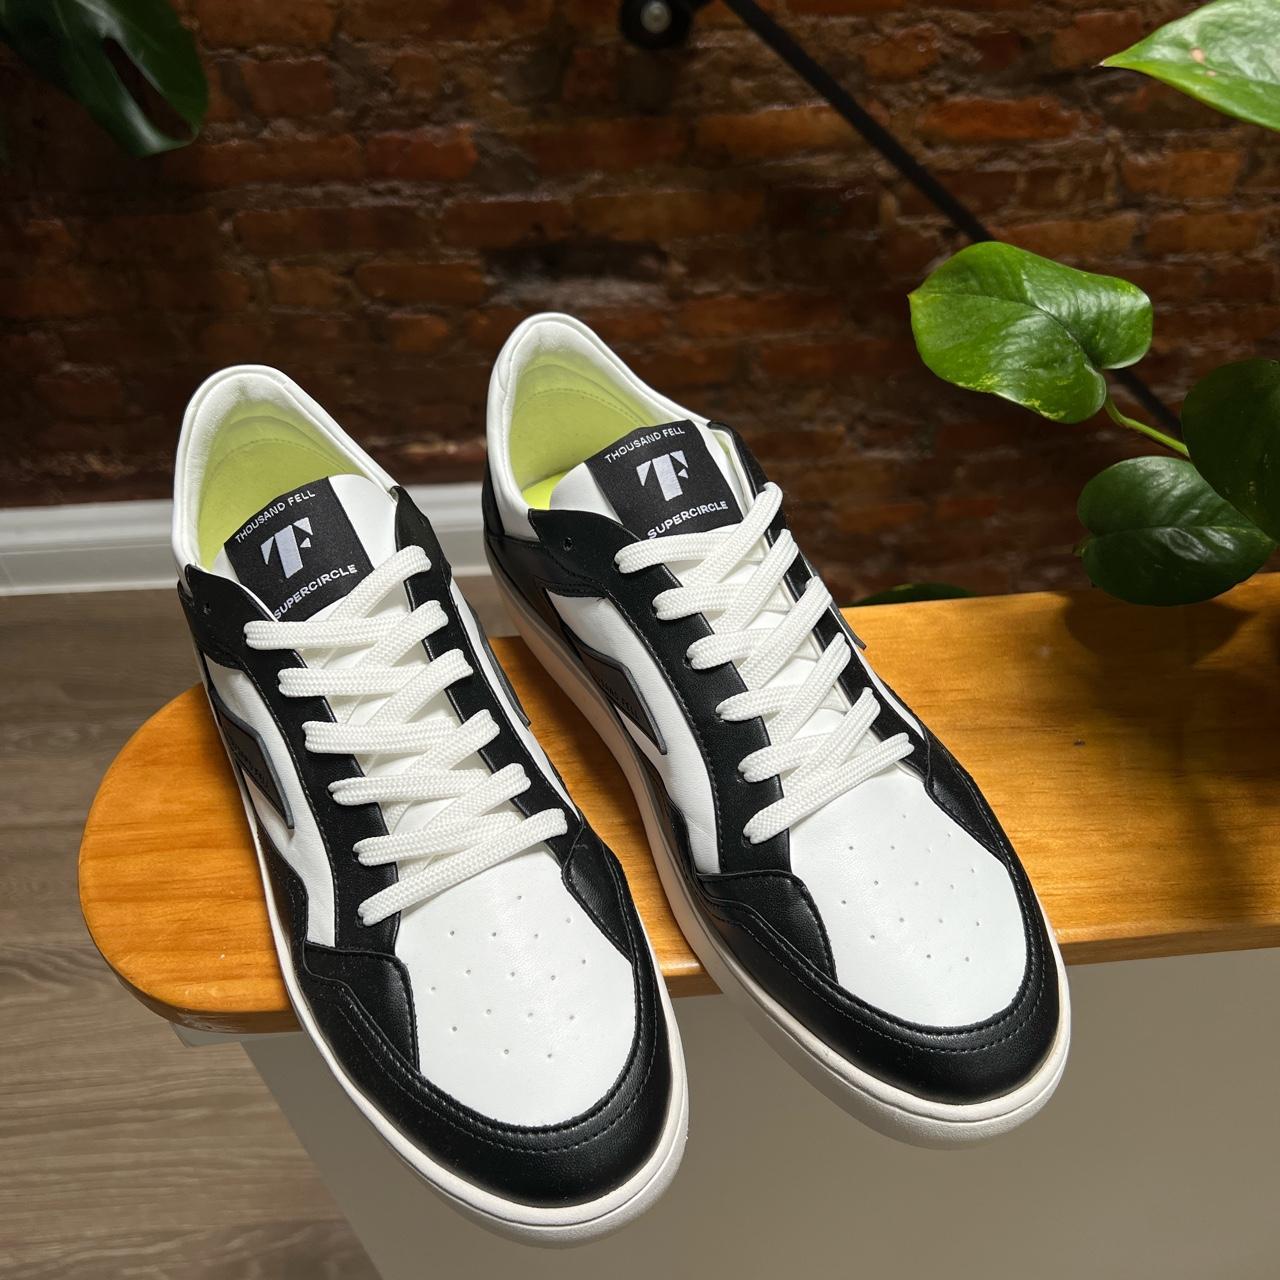 Product Image 2 - Thousand Fell sneakers in new